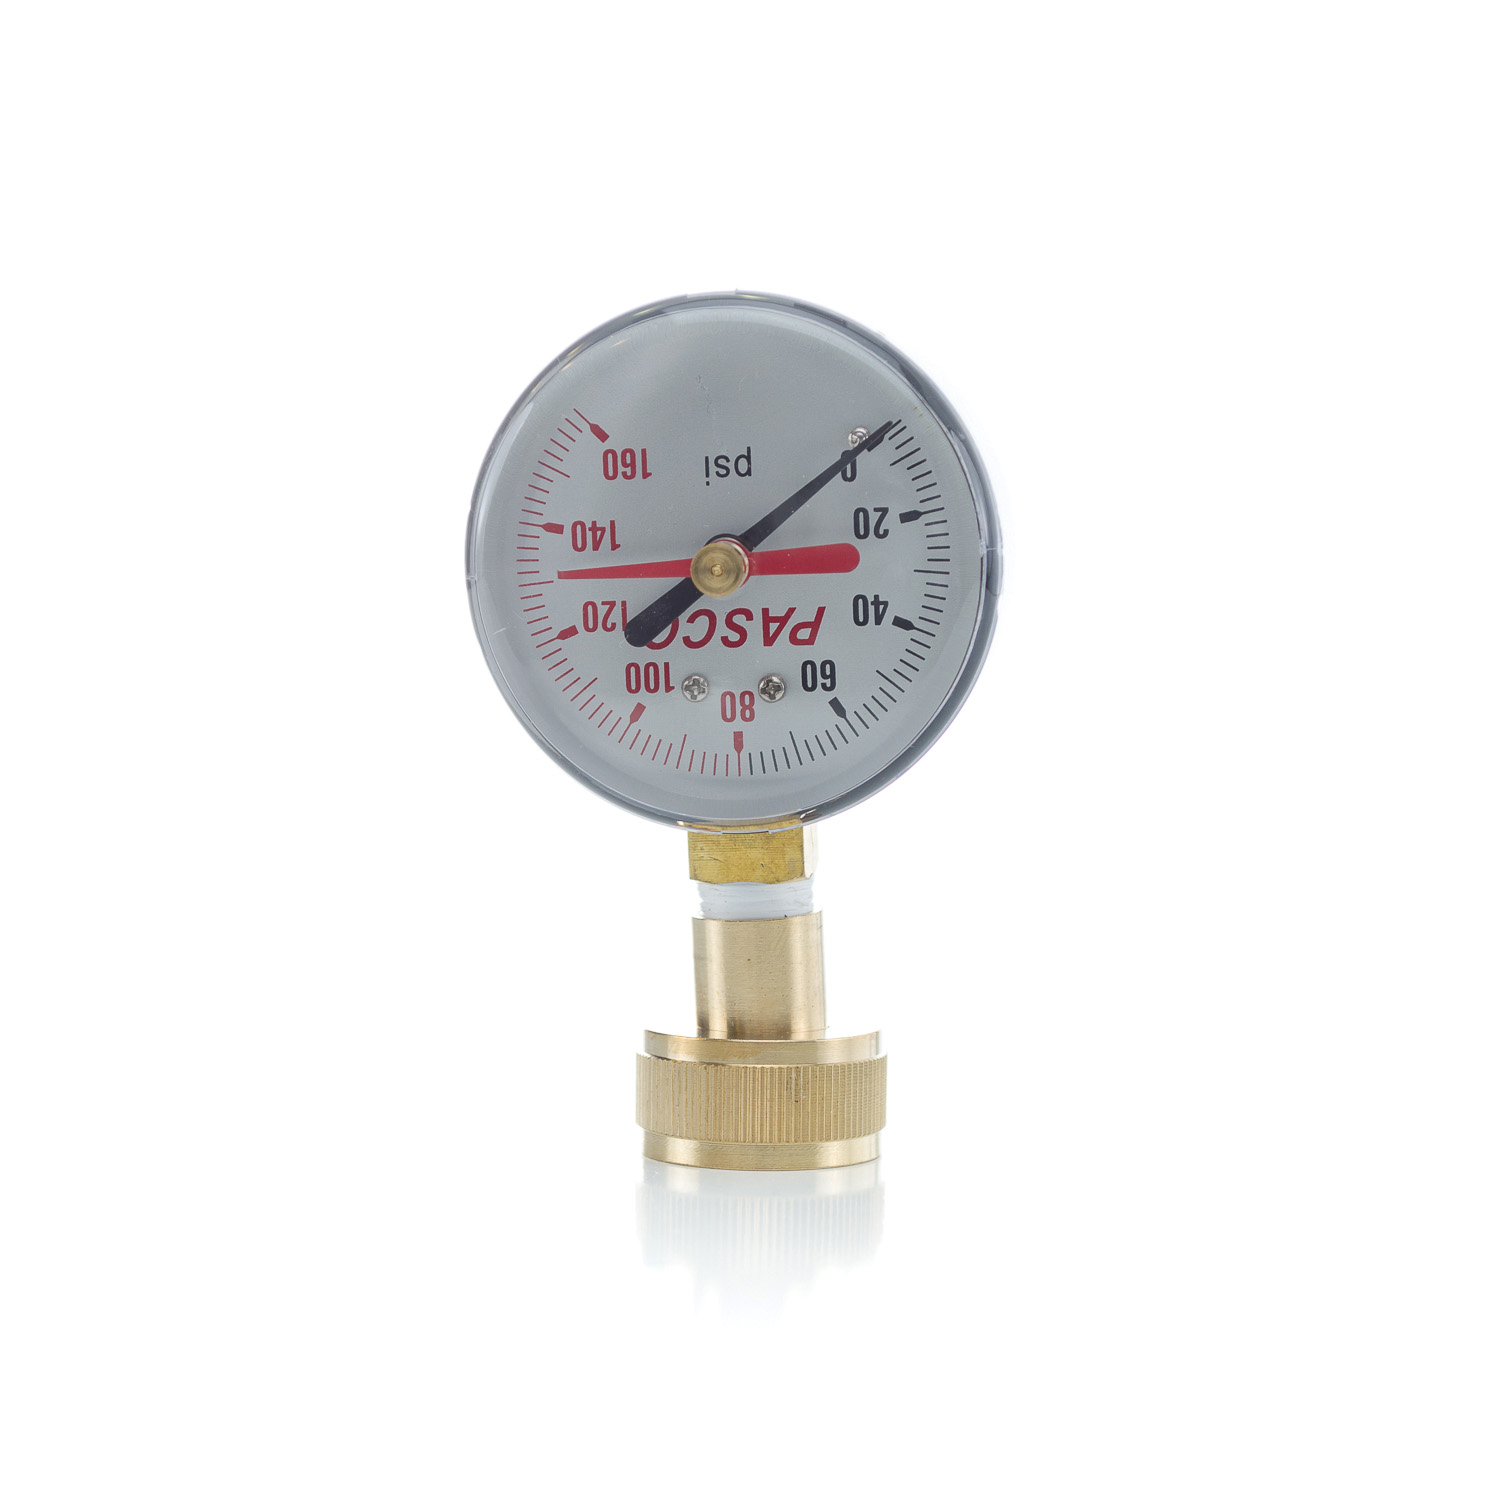 PASCO 1423 Lazy Hand Water Test Gauge, 0 to 160 psi, 3/4 in Female Hose Thread Connection, 2-1/2 in Dial